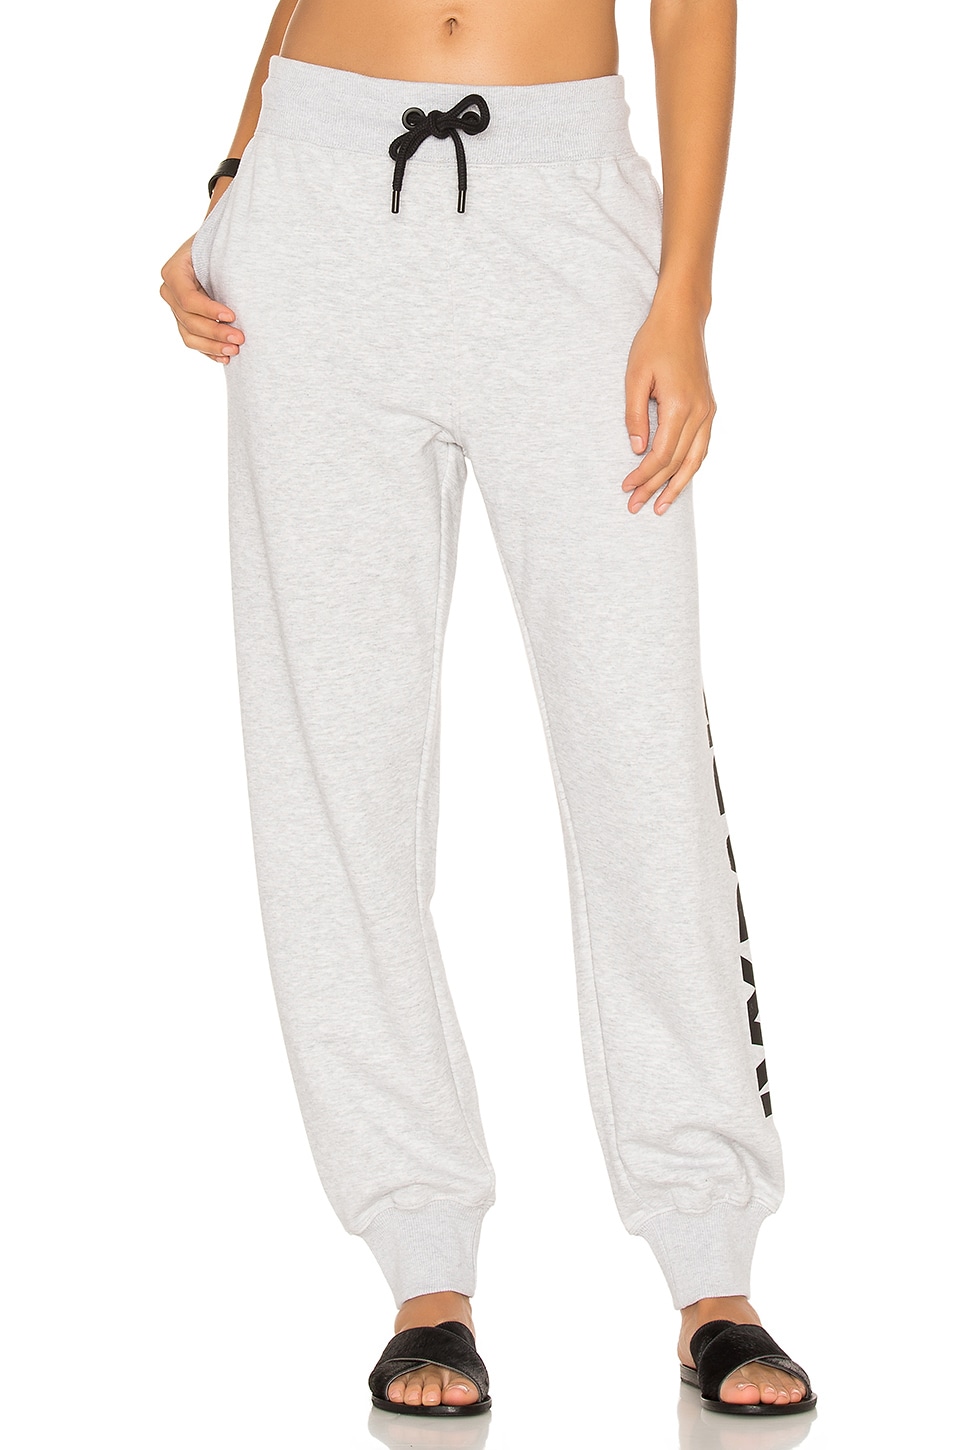 IVY PARK Casual Sweatpants in Grey 